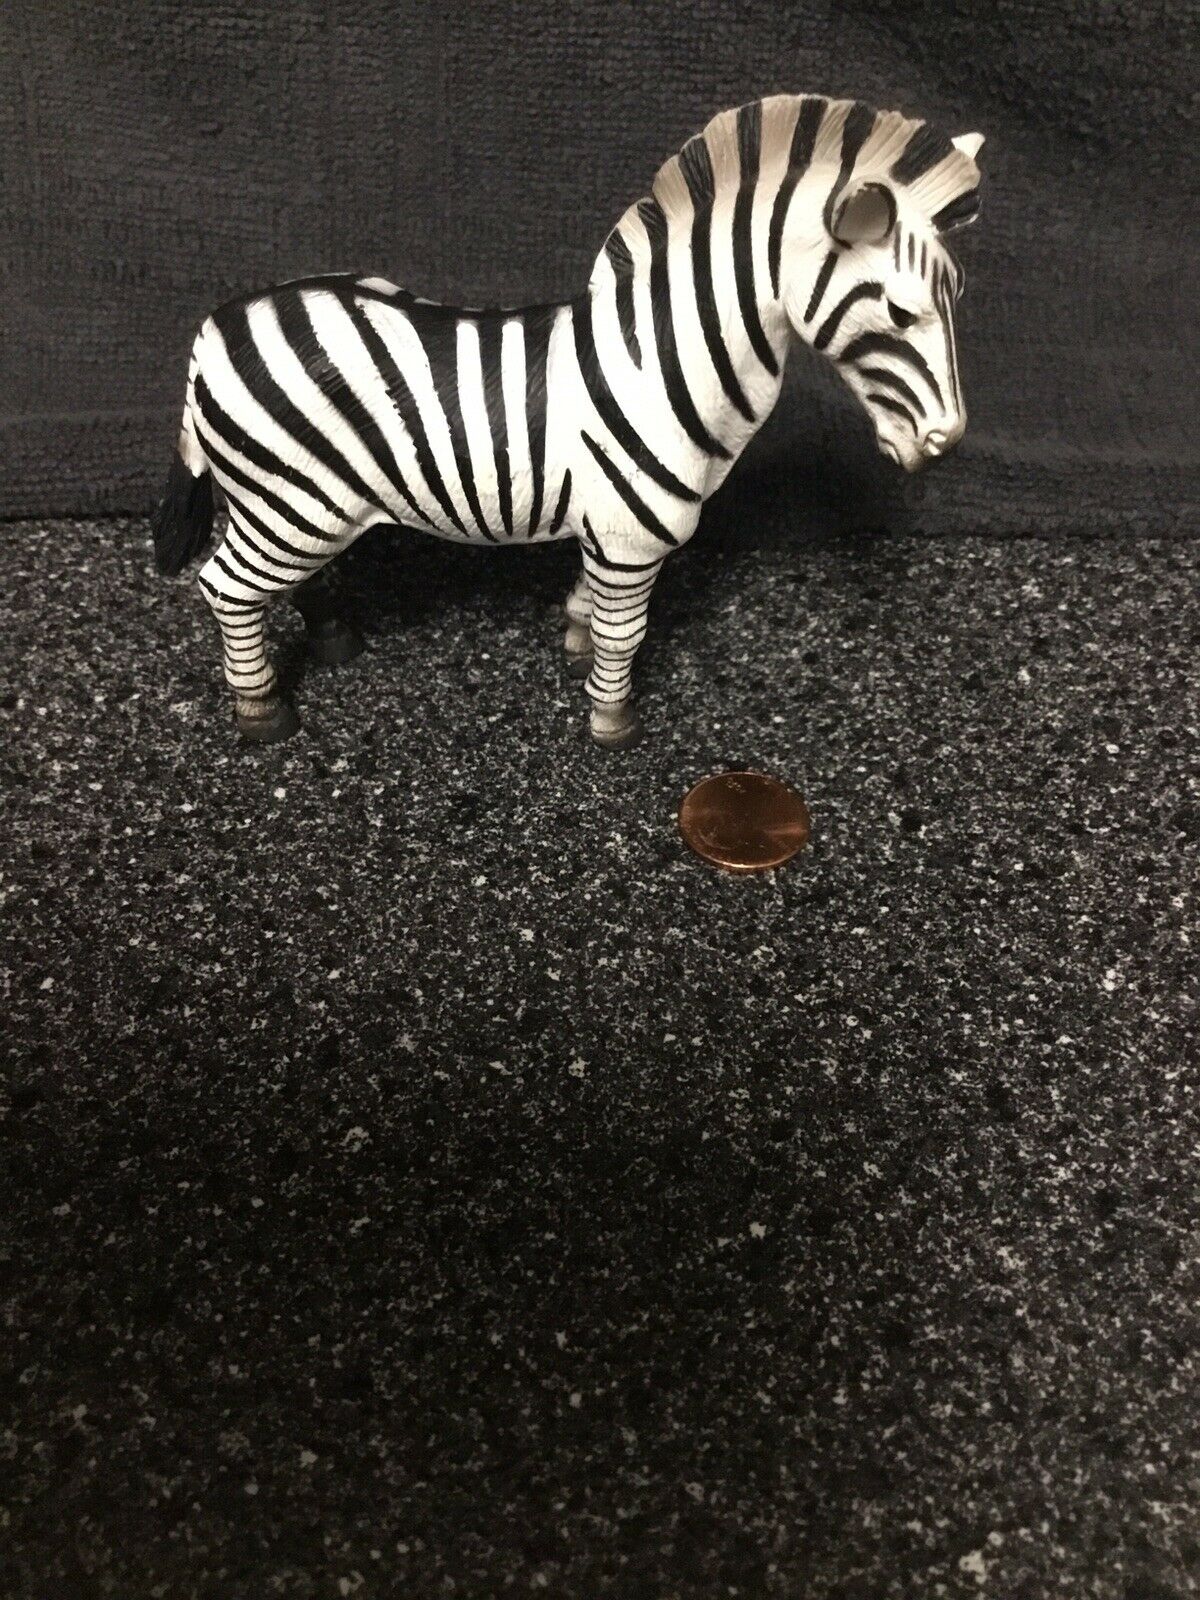 Mojo Zebra New! Never Been Played With Very Hard To Find Rare Unique